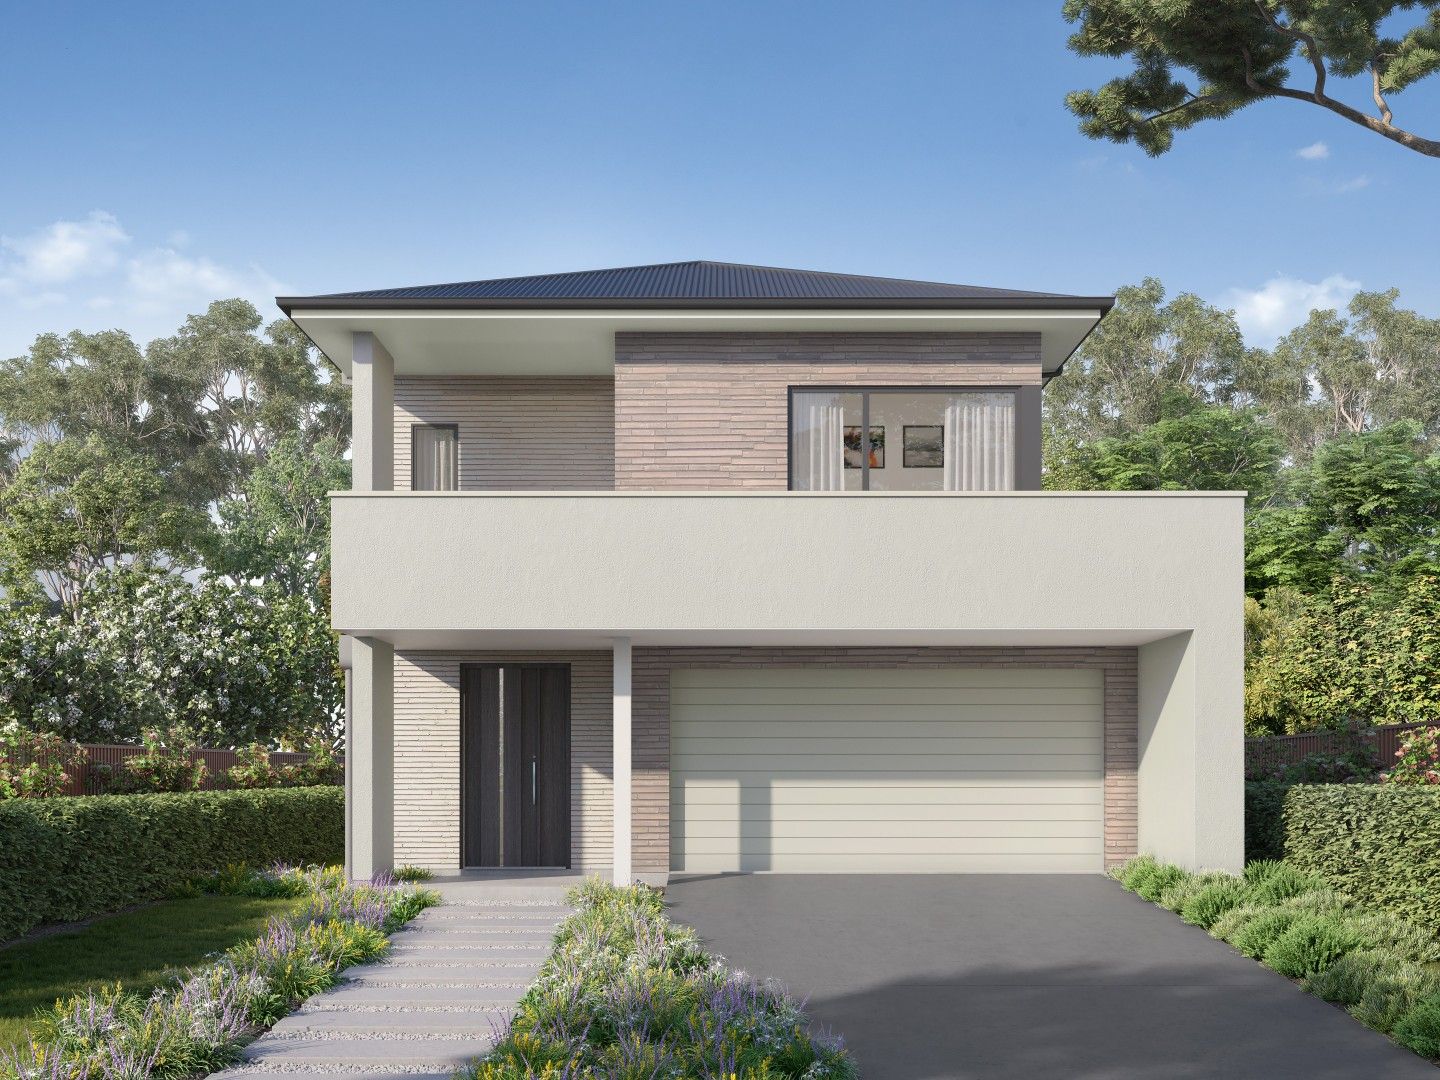 4 bedrooms New House & Land in Secure with 5% Ready To Move In! MARSDEN PARK NSW, 2765